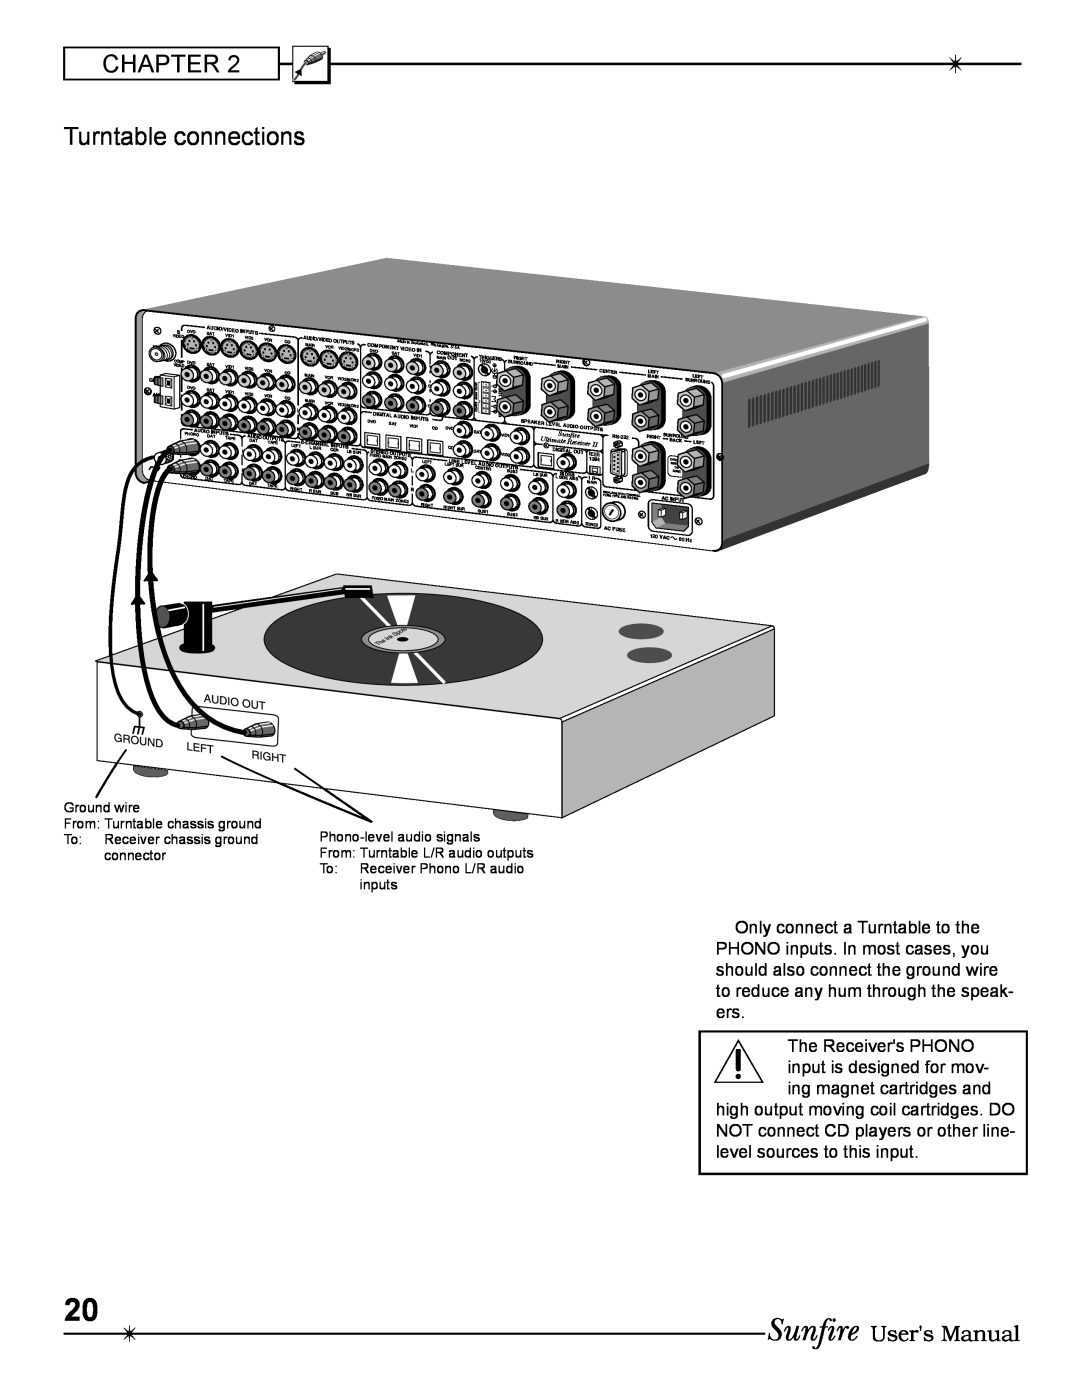 Sunfire Radio manual CHAPTER Turntable connections, Ground wire From Turntable chassis ground, Phono-levelaudio signals 